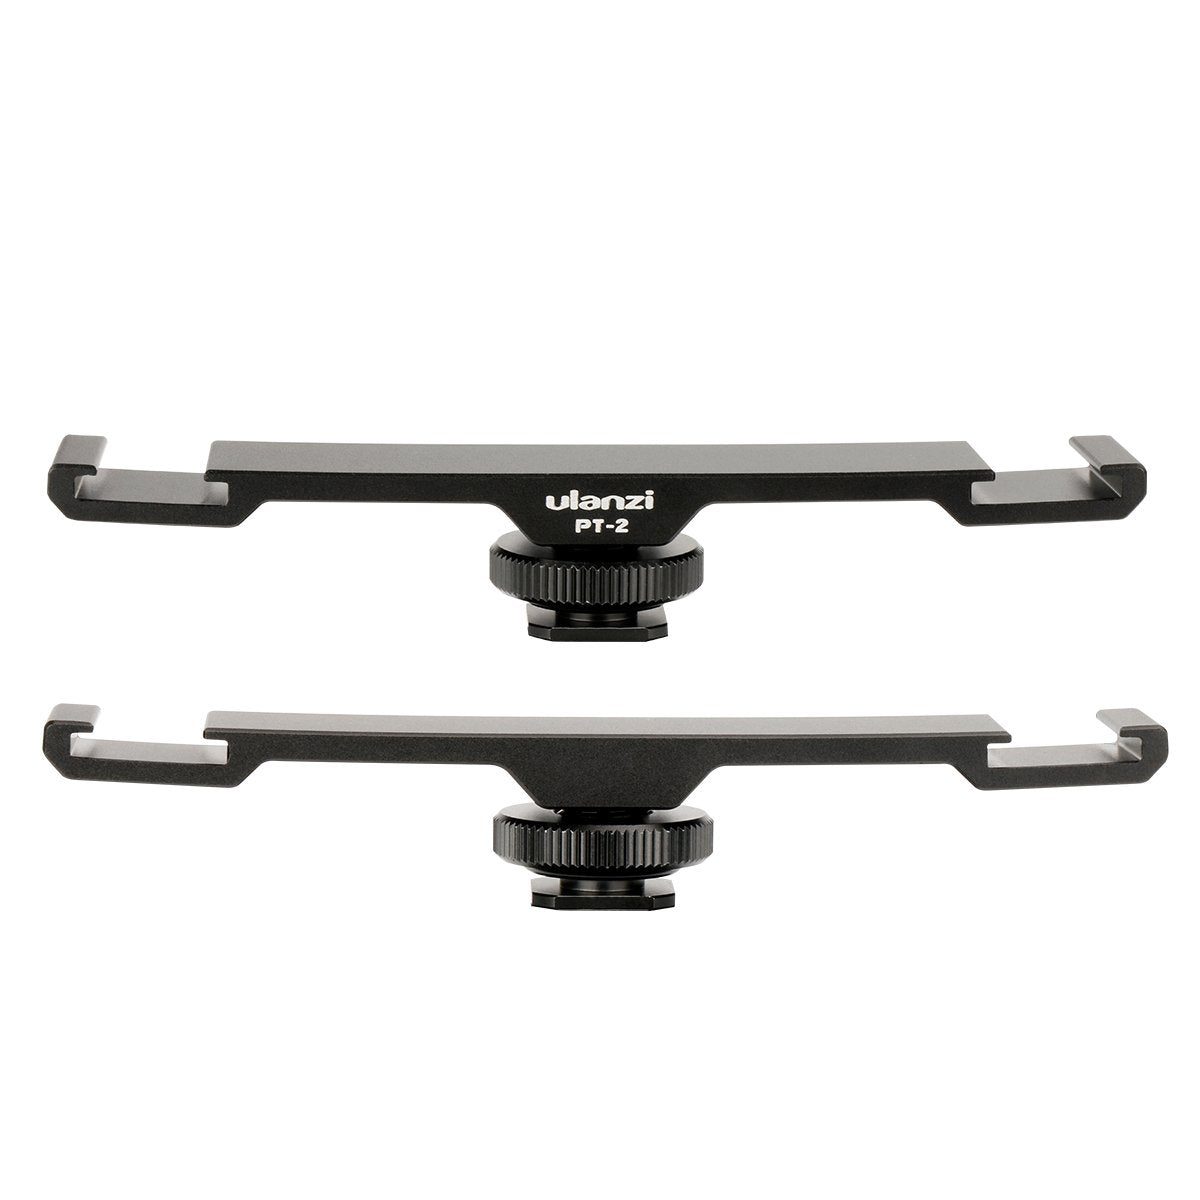 Ulanzi PT-2 Double Hot Shoe Mount Extension Bar Dual Bracket With 1/4" Thread